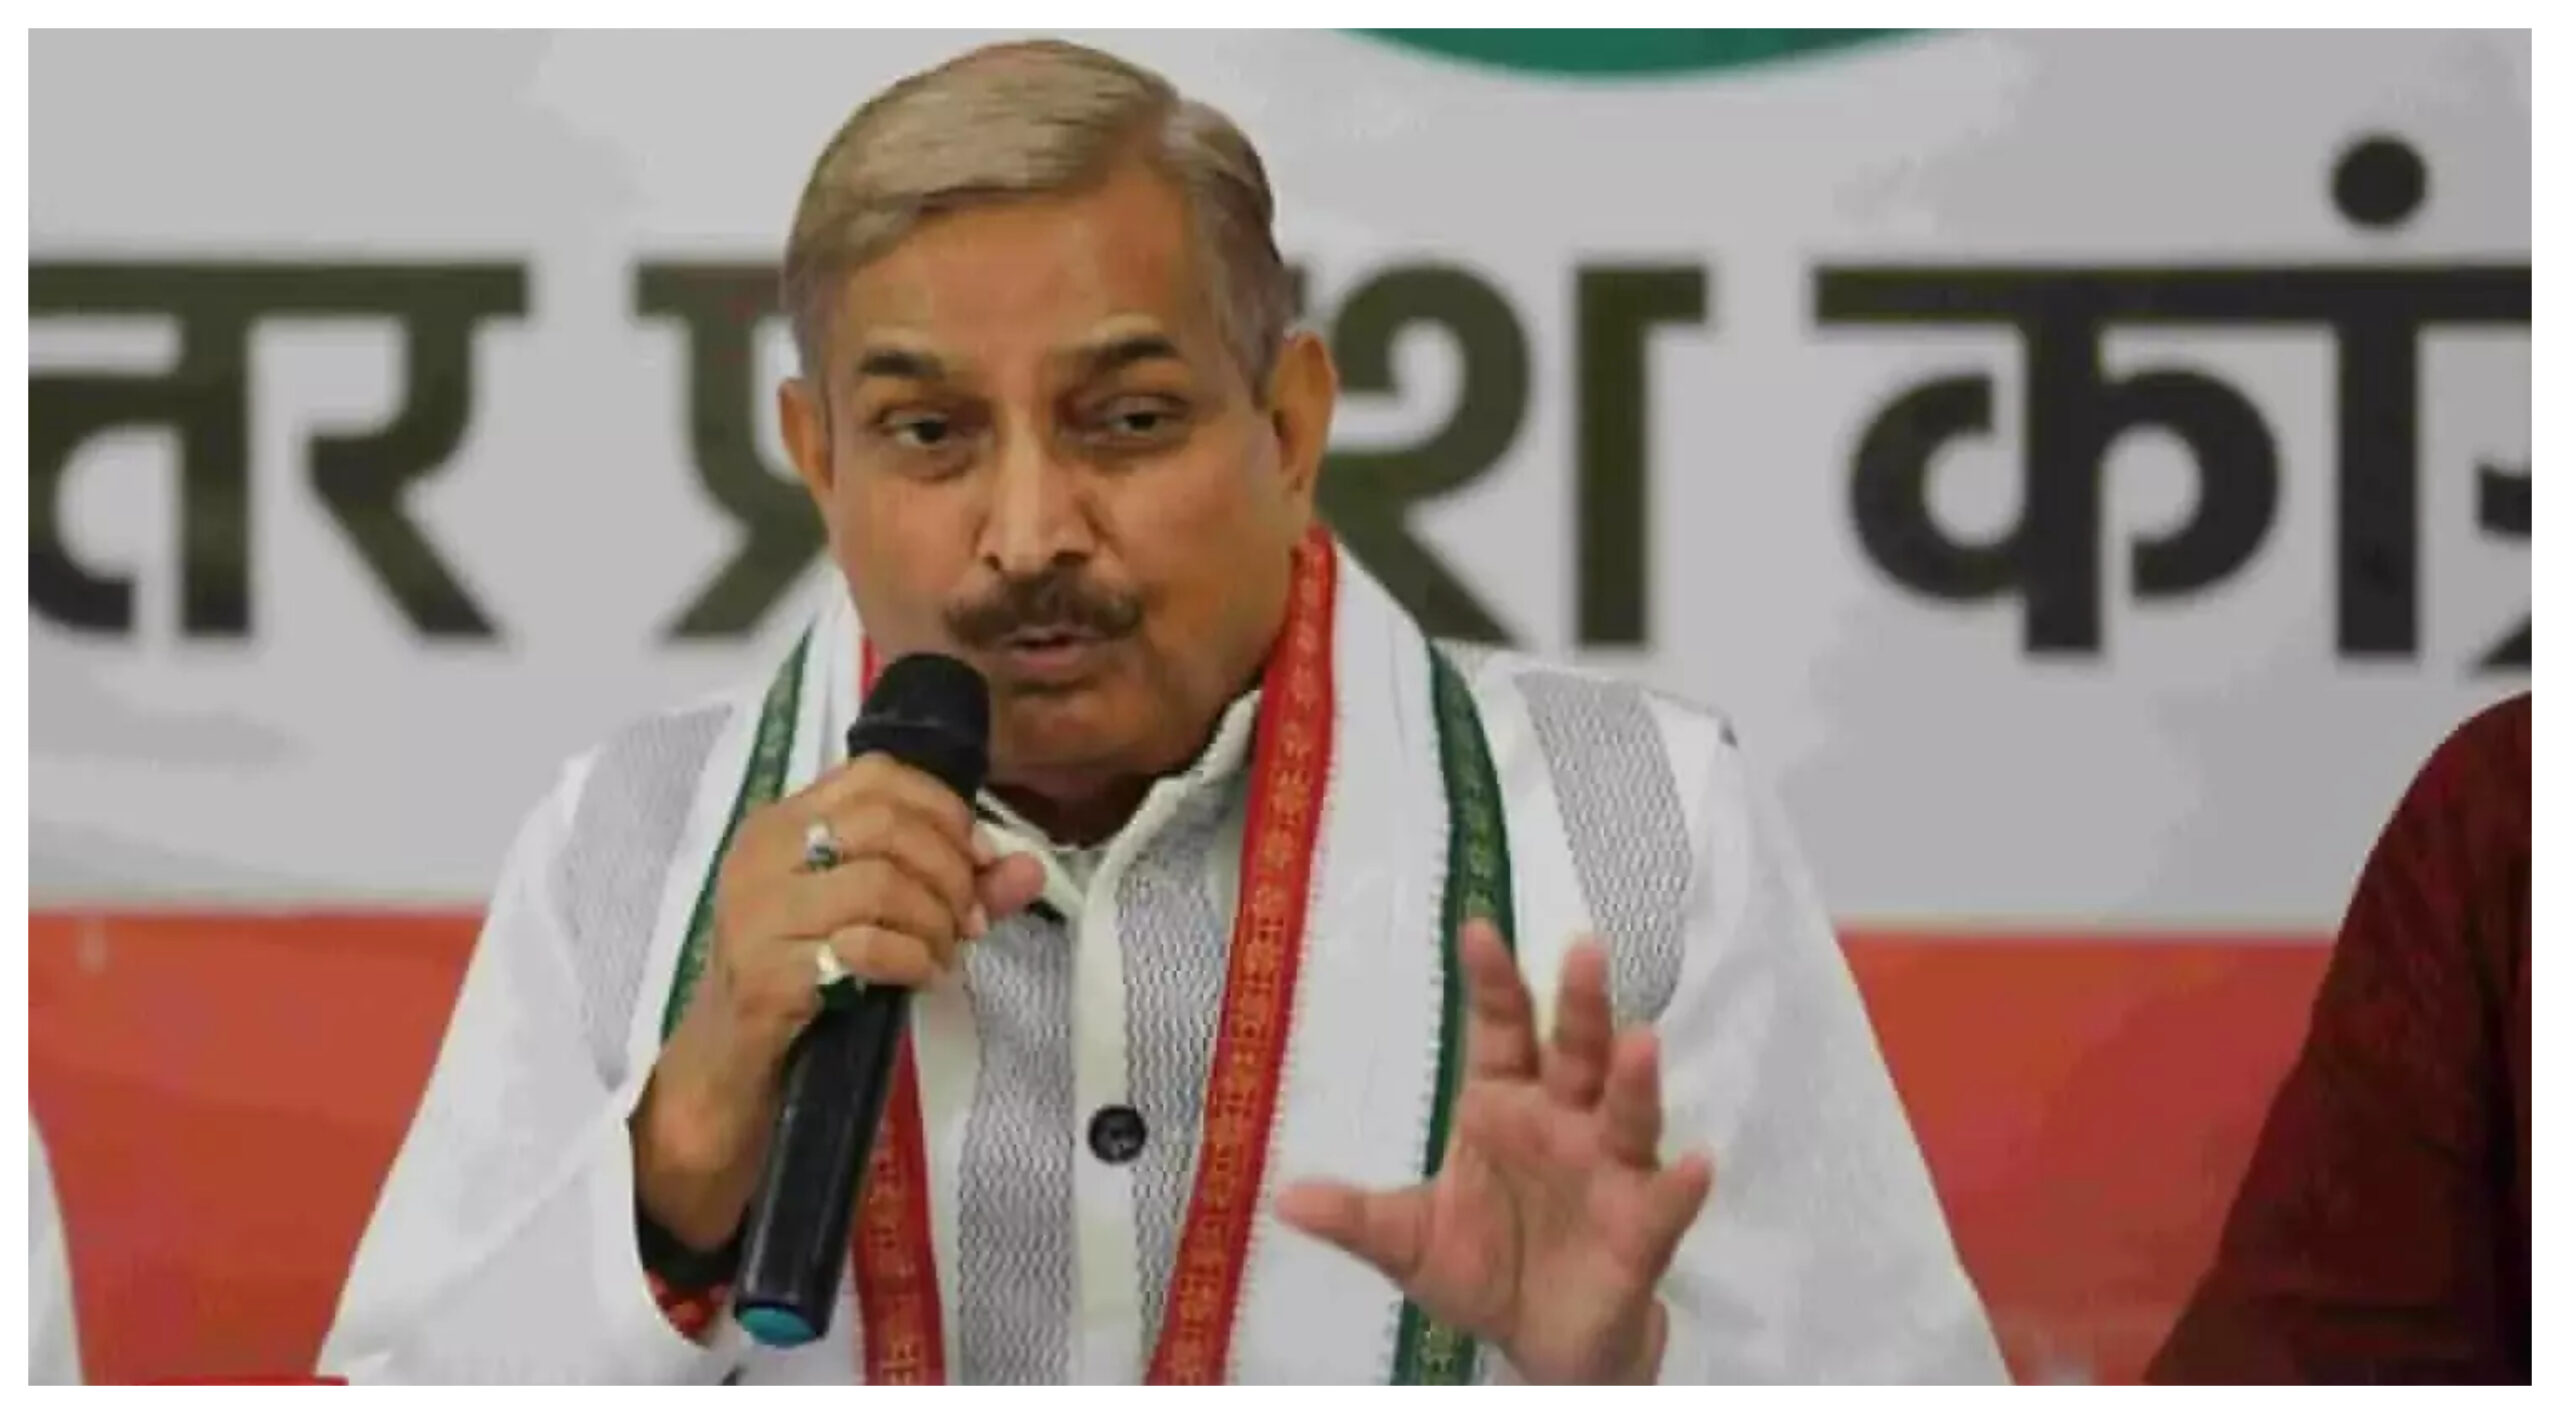 PM Modi knows that he will not be able to win more than 200 seats, hence he spreads lies and hatred - Pramod Tiwari